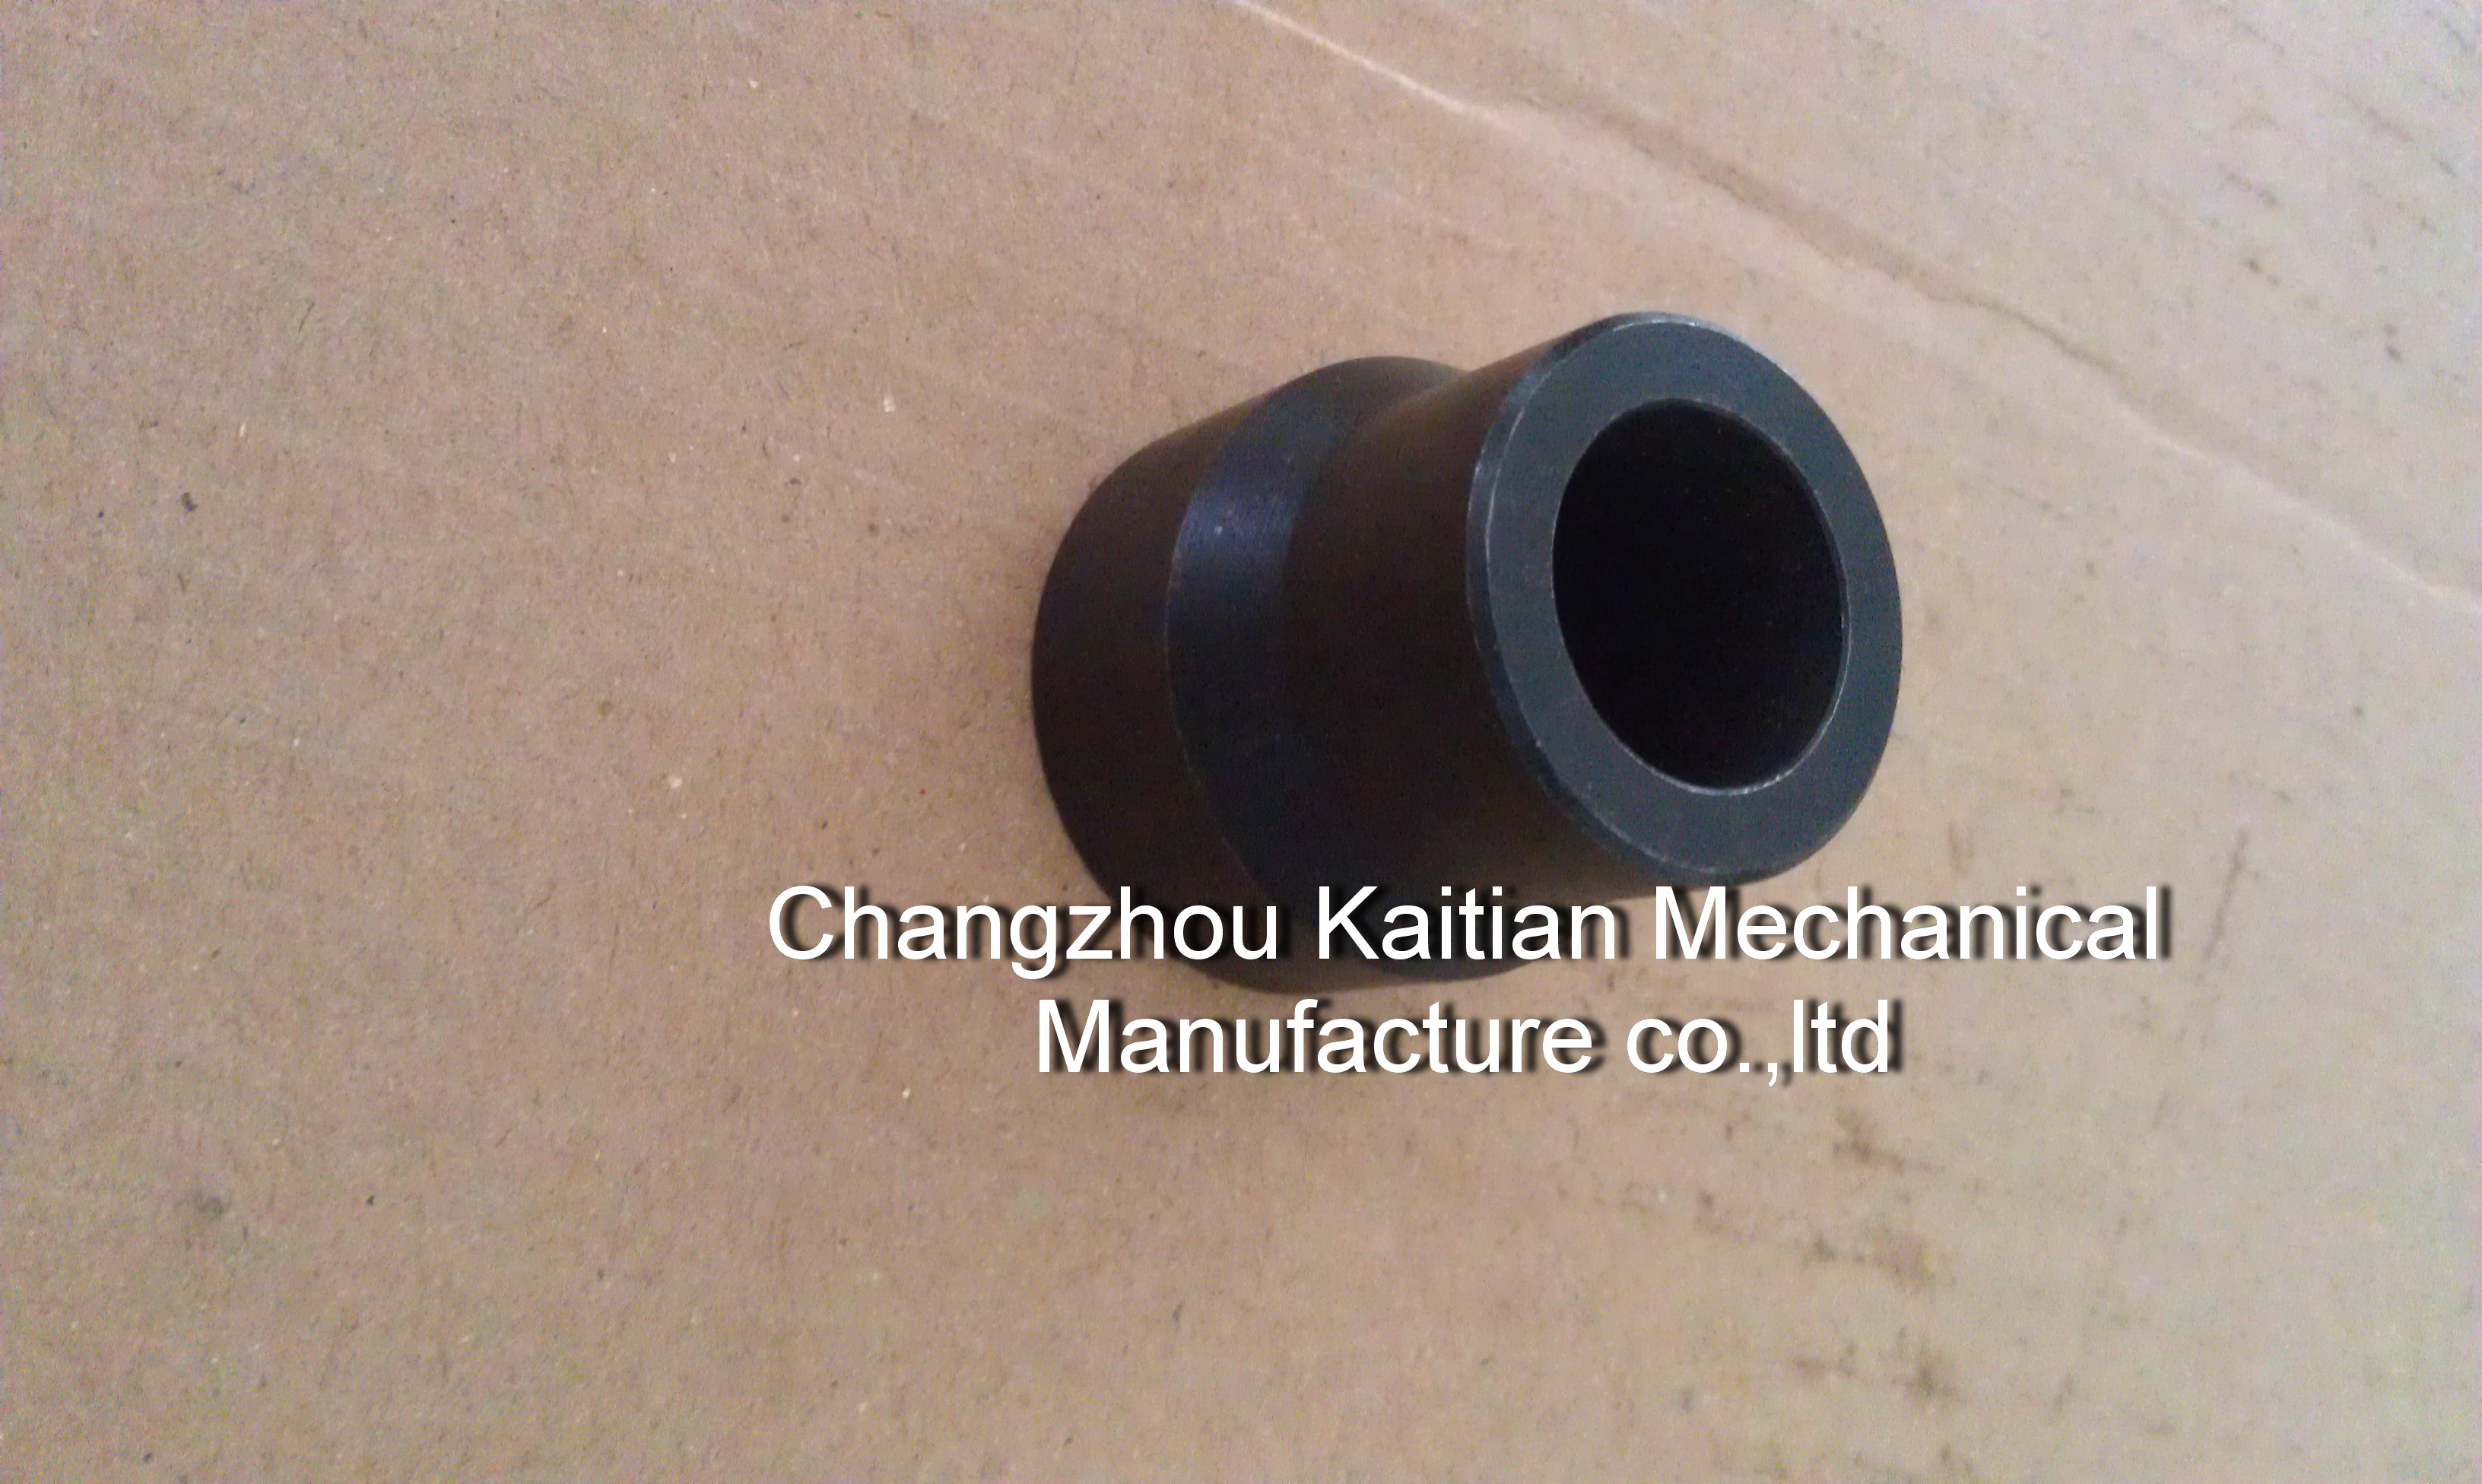 Magnetic Winders Series Changzhou Kaitian Mechnical Manufacture co.,ltd Clamping Adapter